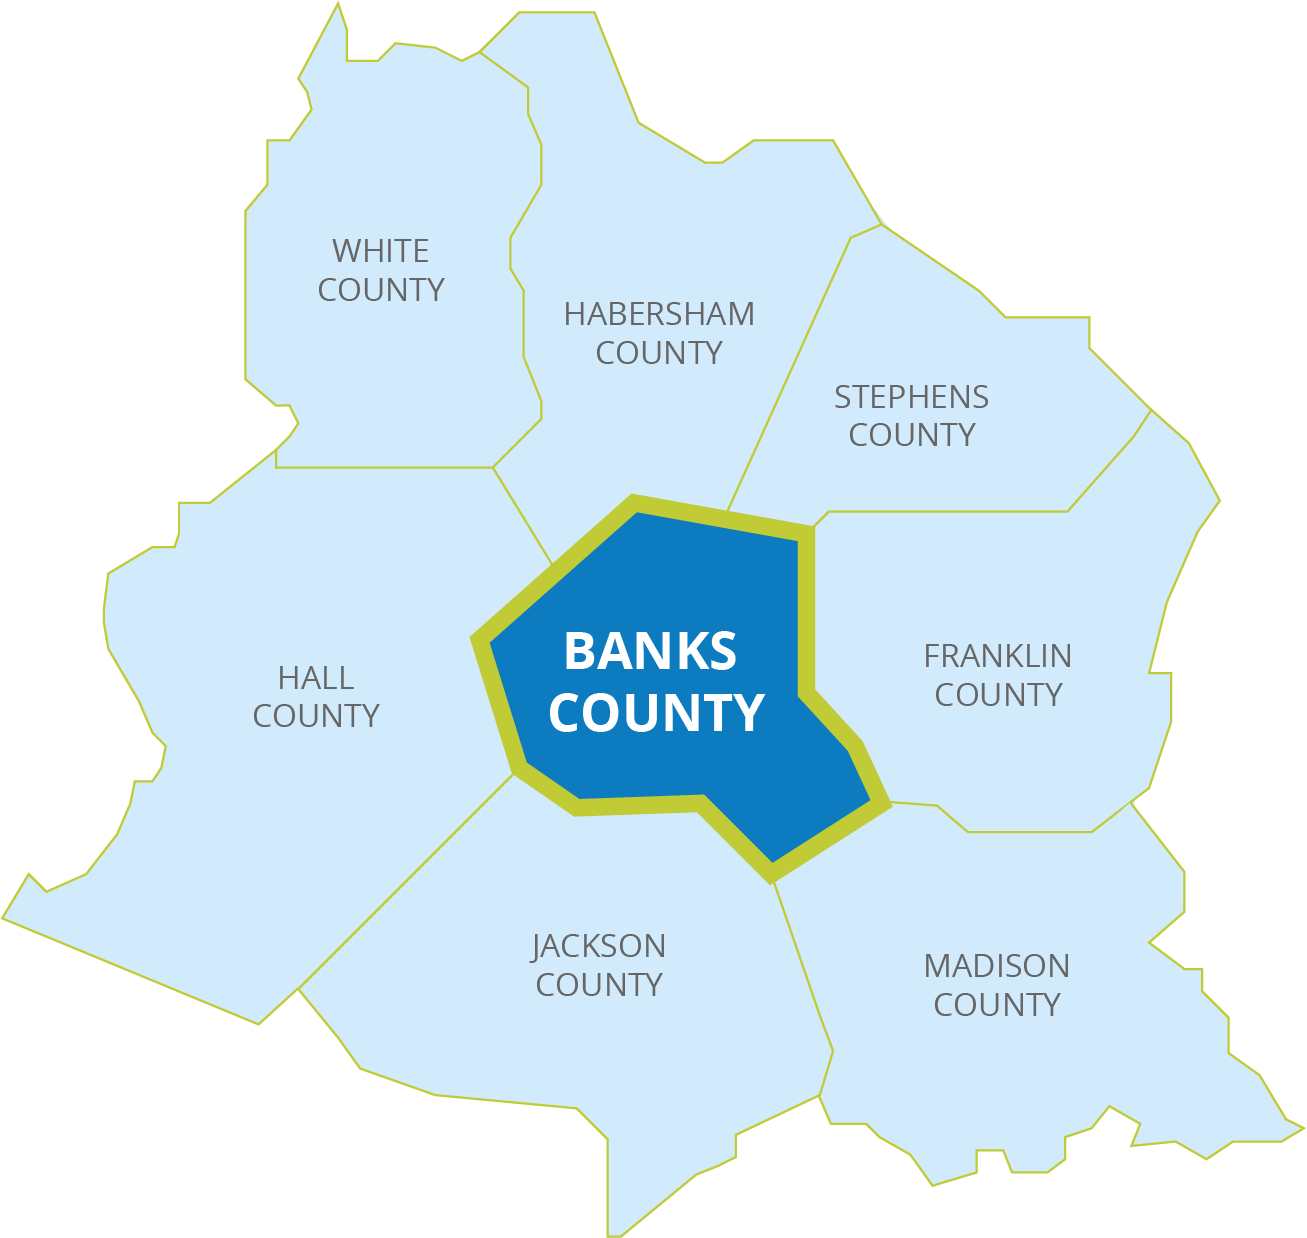 Map of Banks county and the surrounding counties (White, Habersham, Stephens, Franklin, Madison, Jackson, and Hall county)